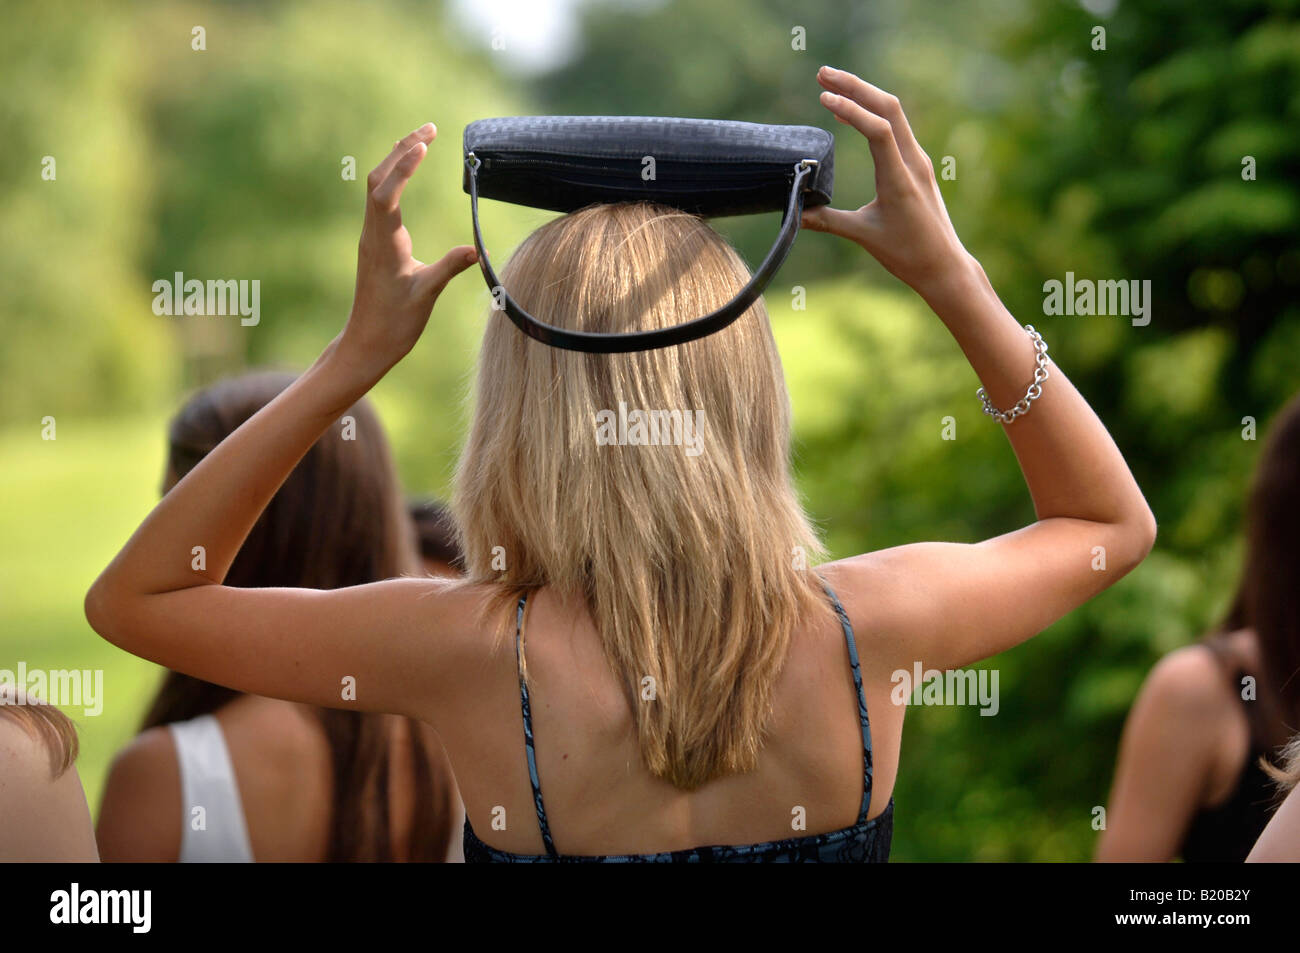 A YOUNG WOMAN IN A PARTY DRESS BALANCES HER HANDBAG ON HER HEAD AT A SUMMER GARDEN FUNCTION UK Stock Photo